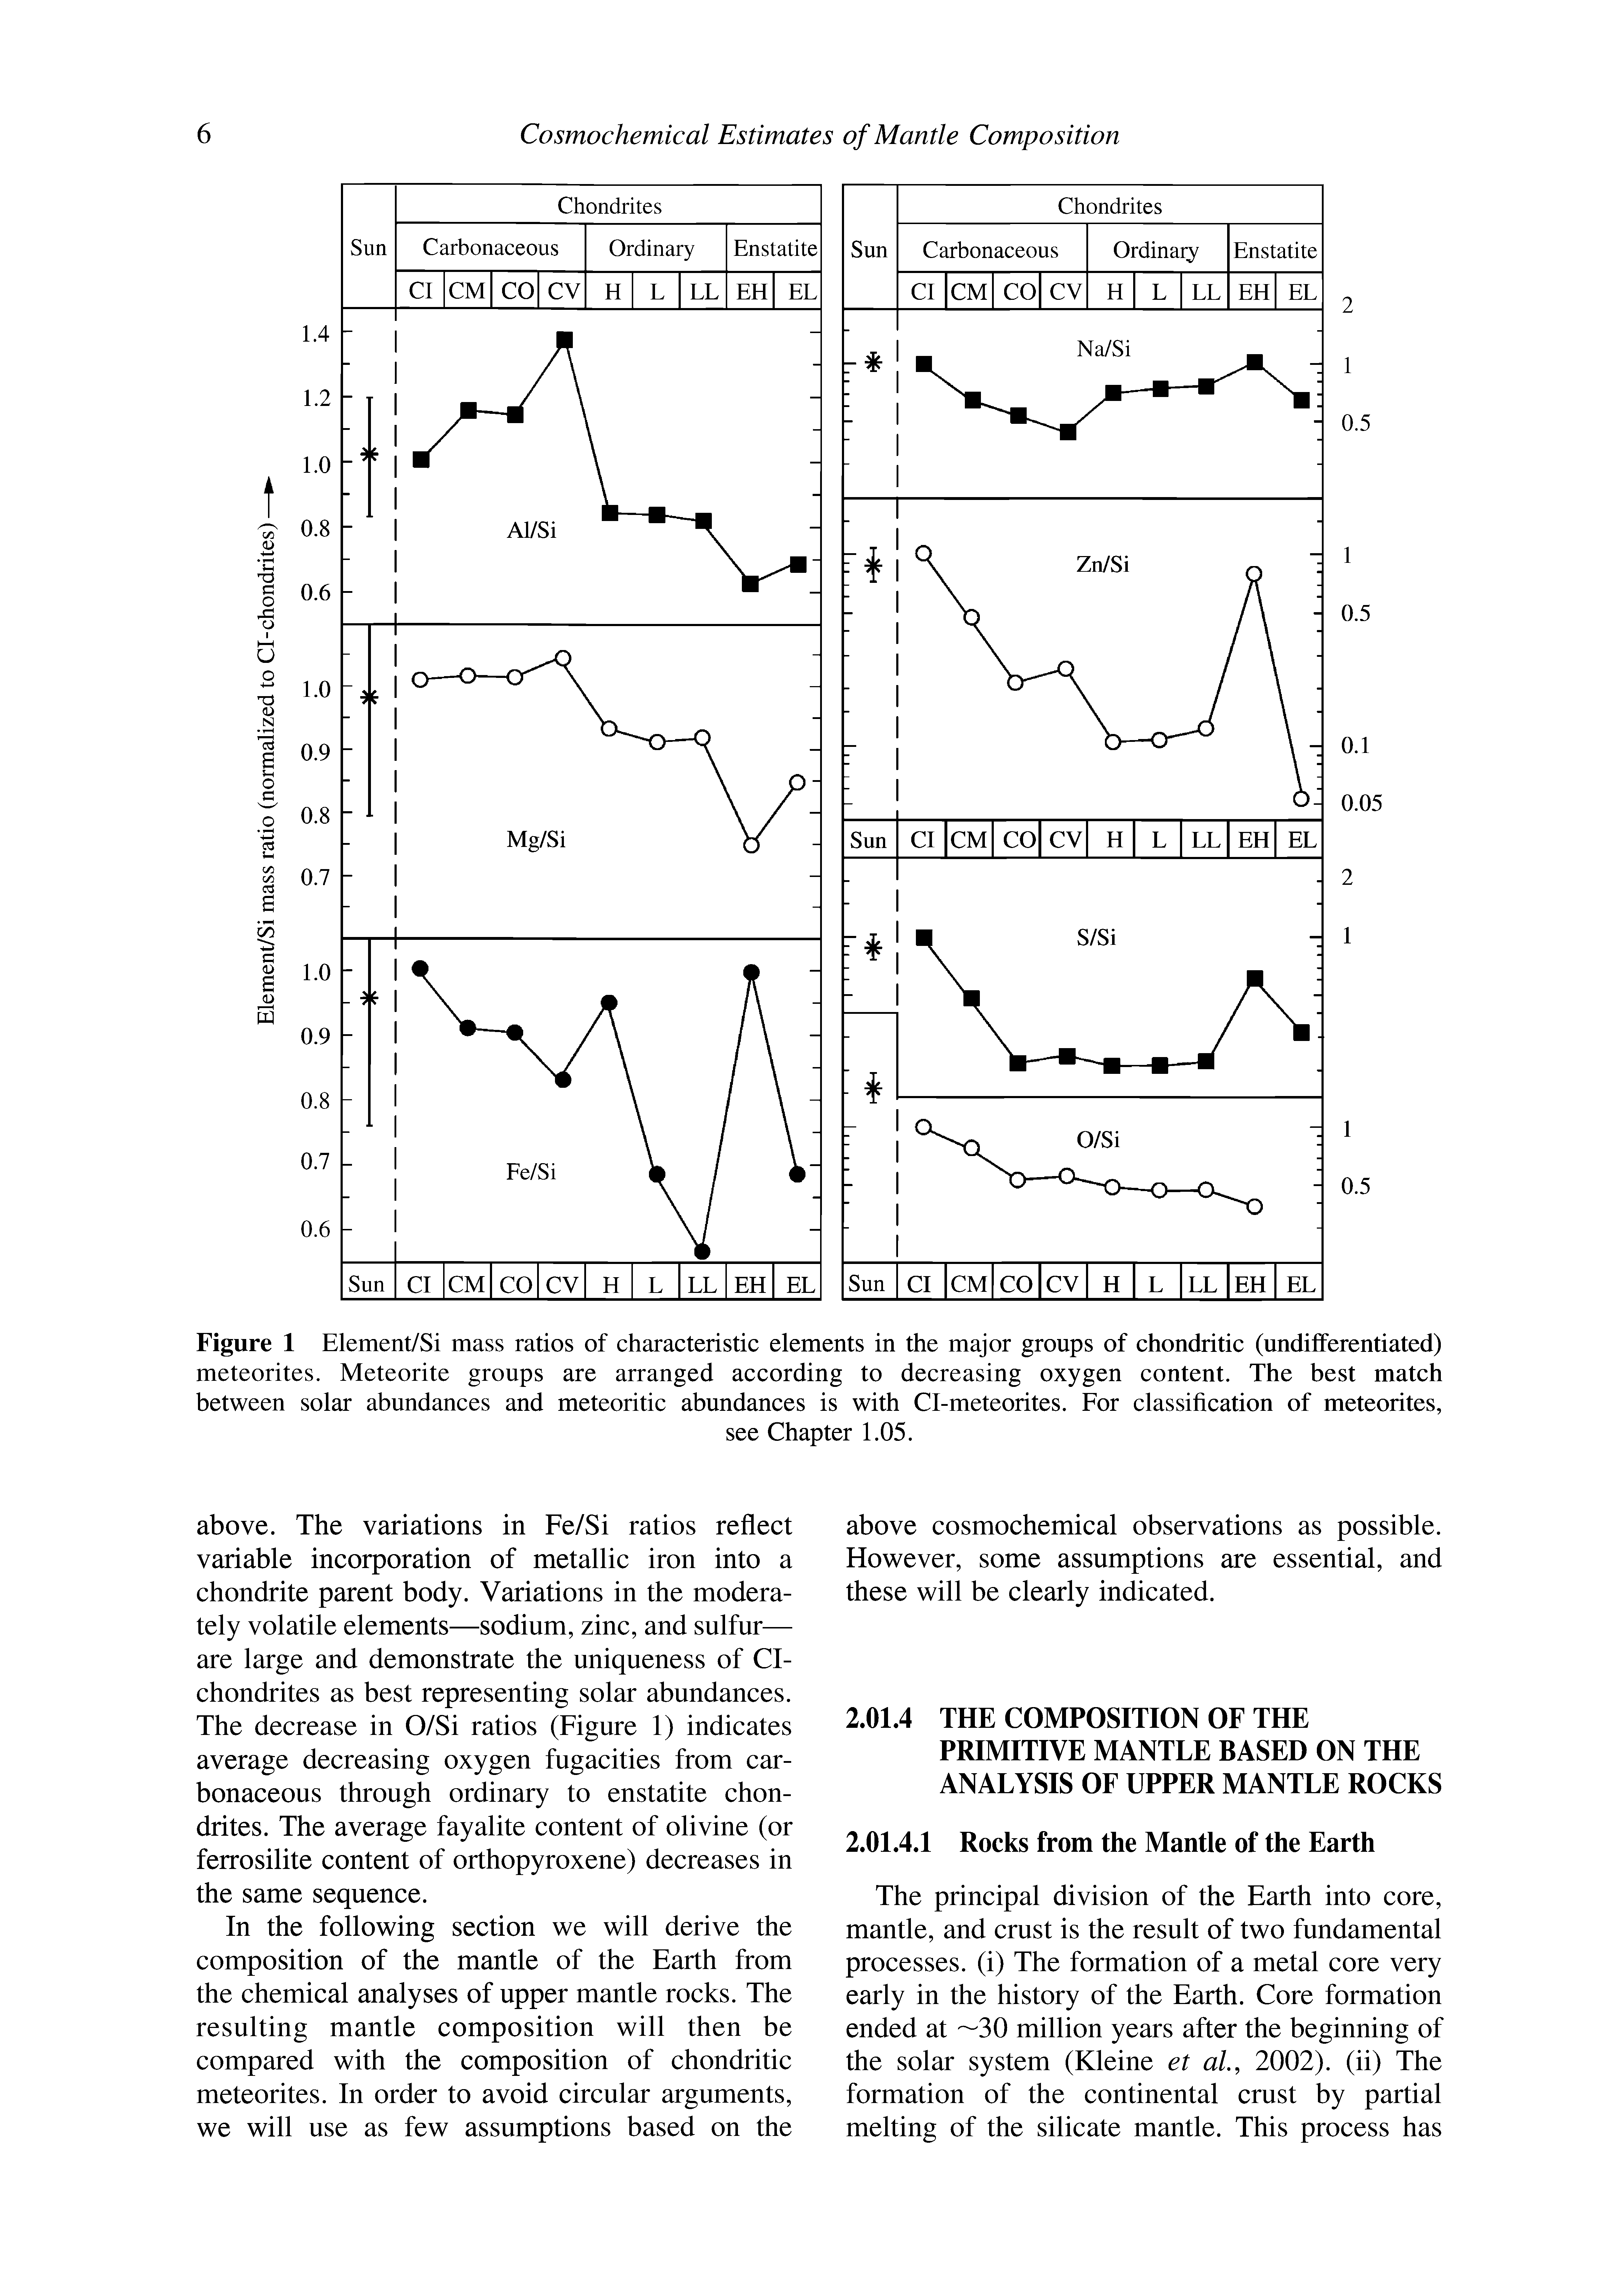 Figure 1 Element/Si mass ratios of characteristic elements in the major groups of chondritic (undifferentiated) meteorites. Meteorite groups are arranged according to decreasing oxygen content. The best match between solar abundances and meteoritic abundances is with Cl-meteorites. For classification of meteorites,...